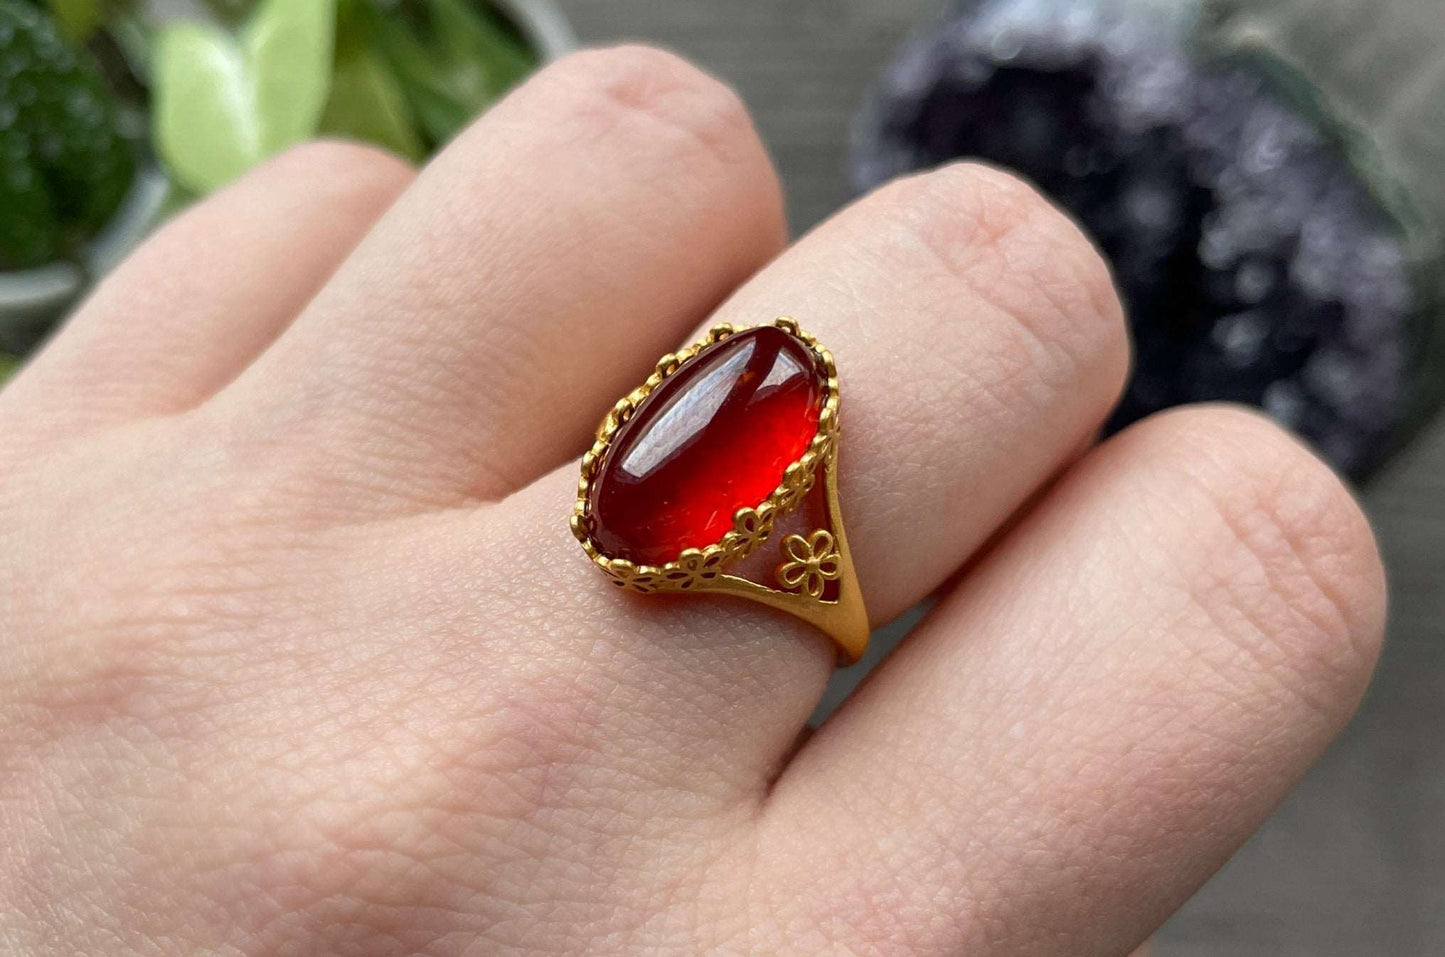 Pictured is a garnet gemstone set in an S925 sterling silver ring.